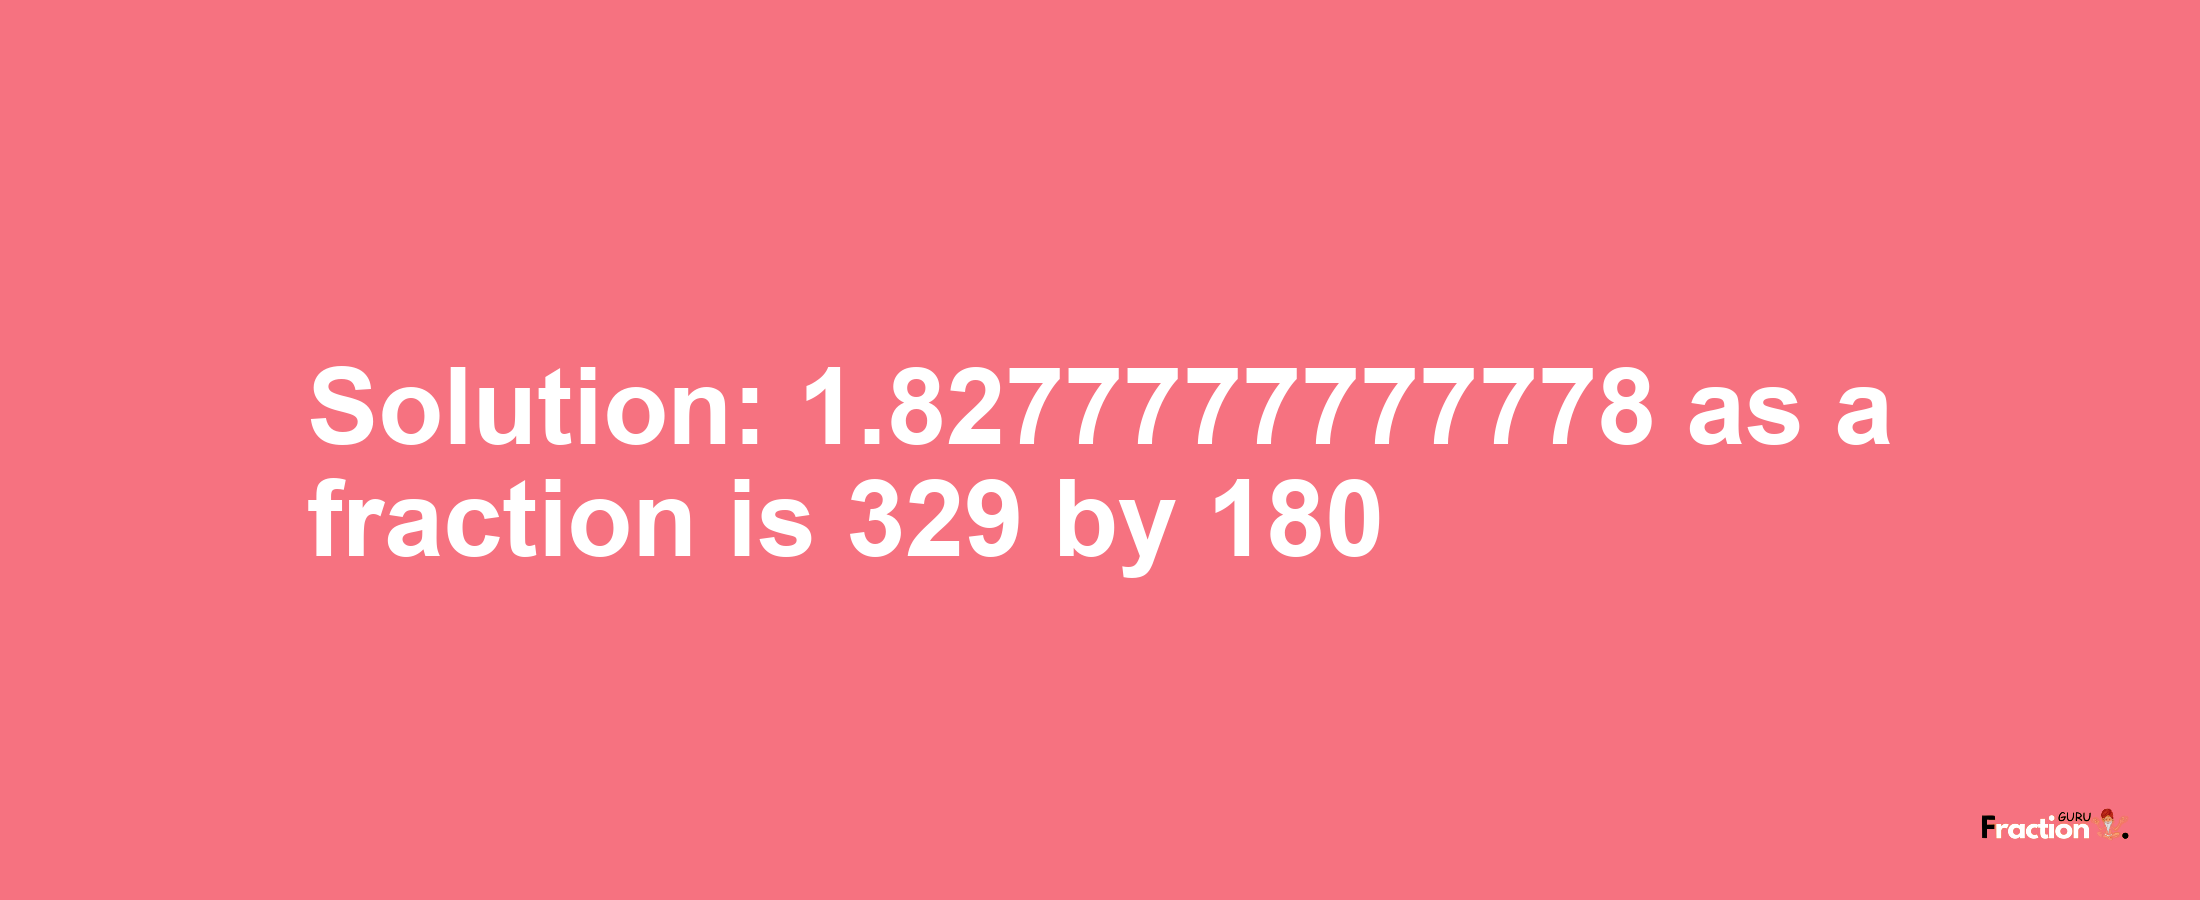 Solution:1.8277777777778 as a fraction is 329/180